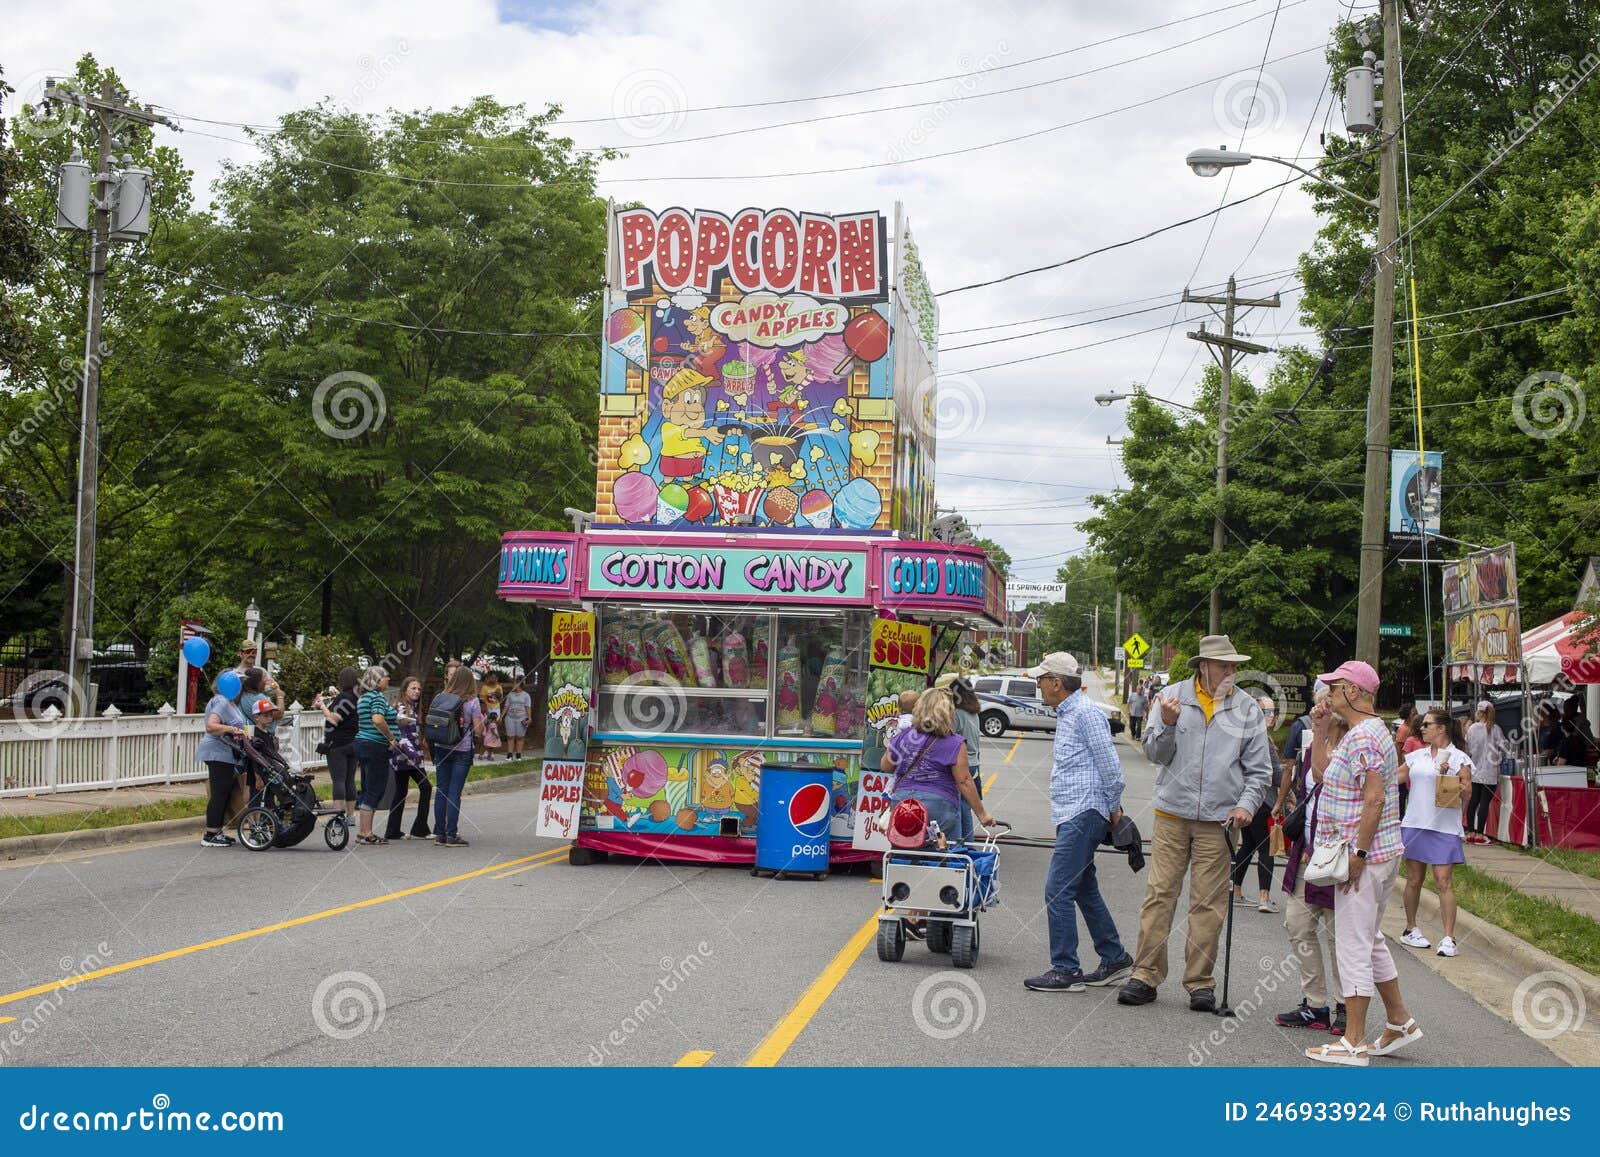 A Popcorn and Cotton Candy Food Vendor Stand at Kernersville Folly